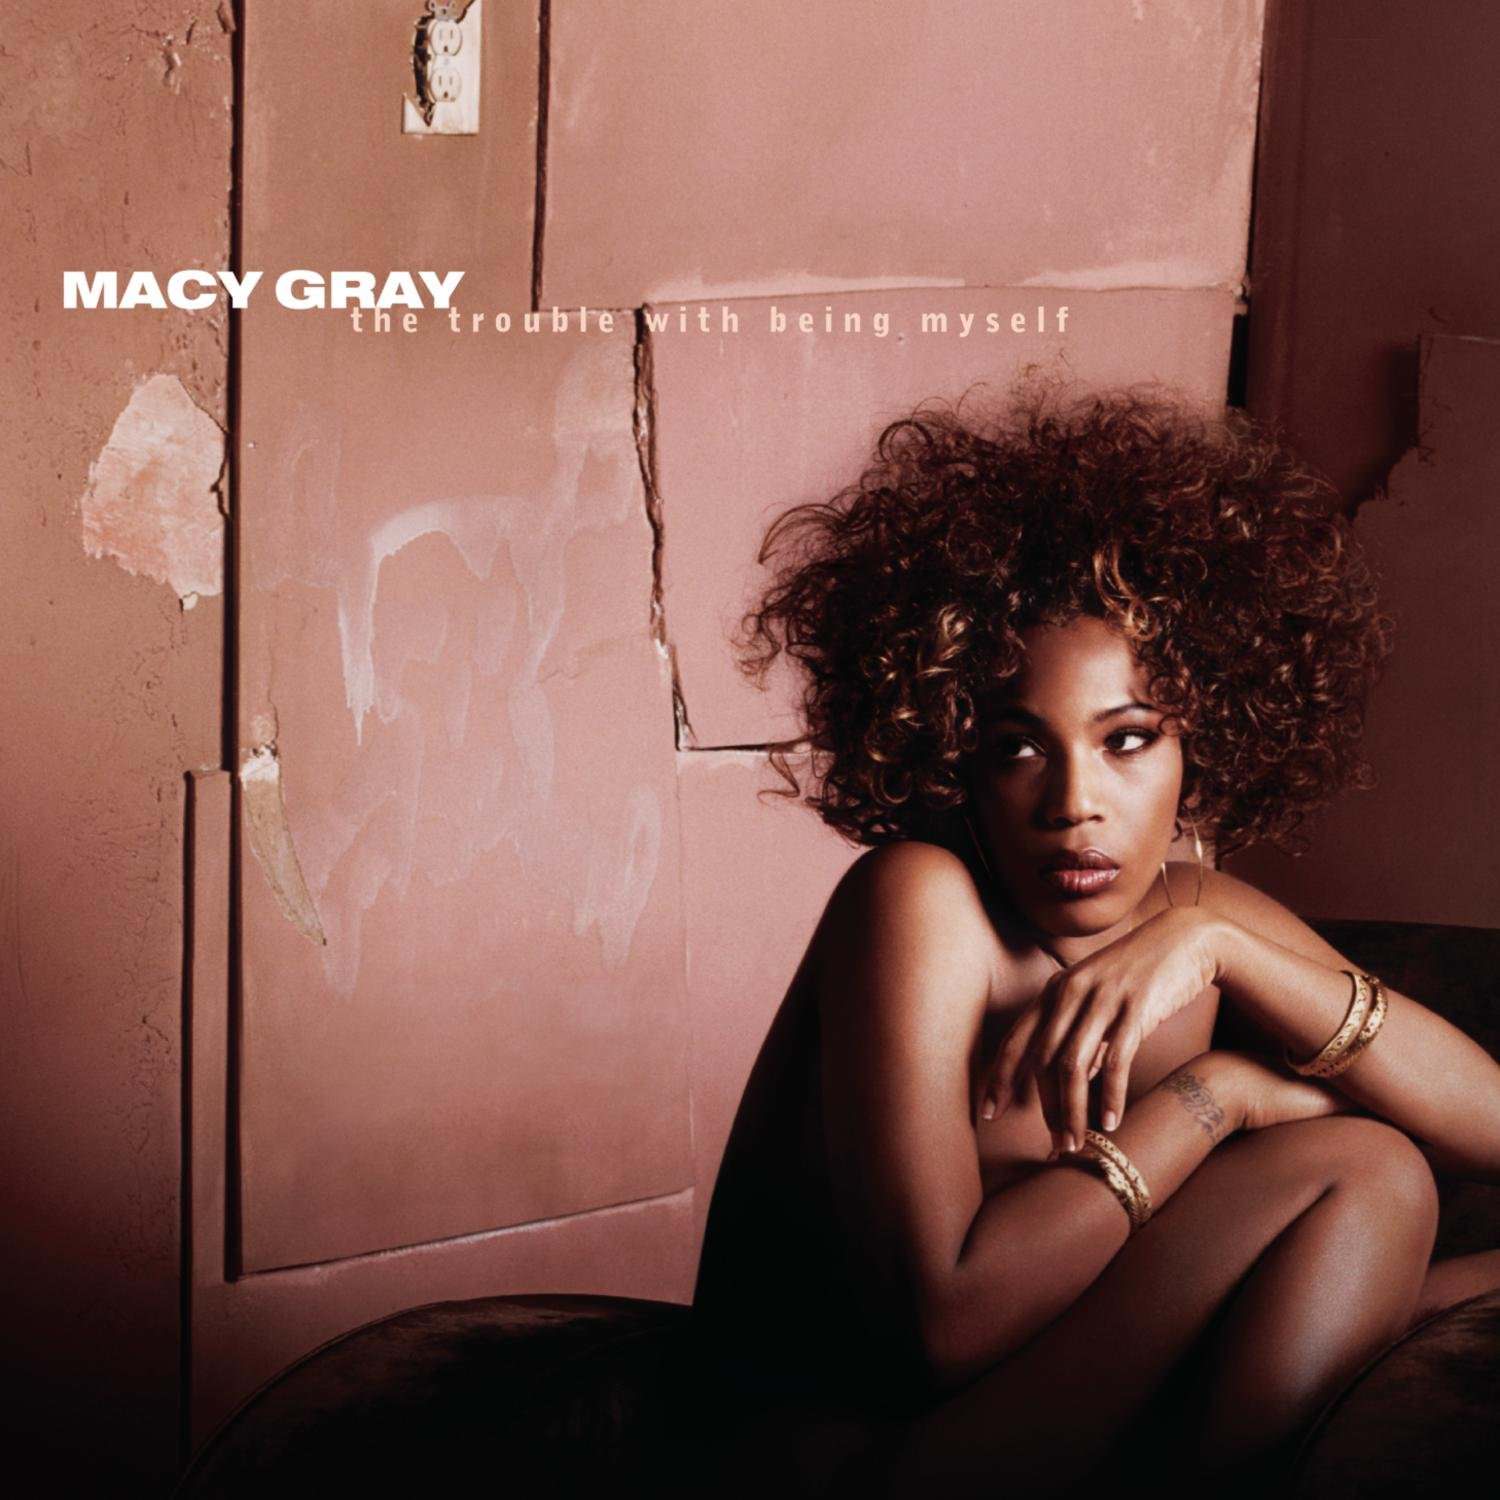 Macy Gray – The Trouble With Being Myself (2003) [AcousticSounds DSF DSD64/2,82MHz + FLAC 24bit/88,2kHz]